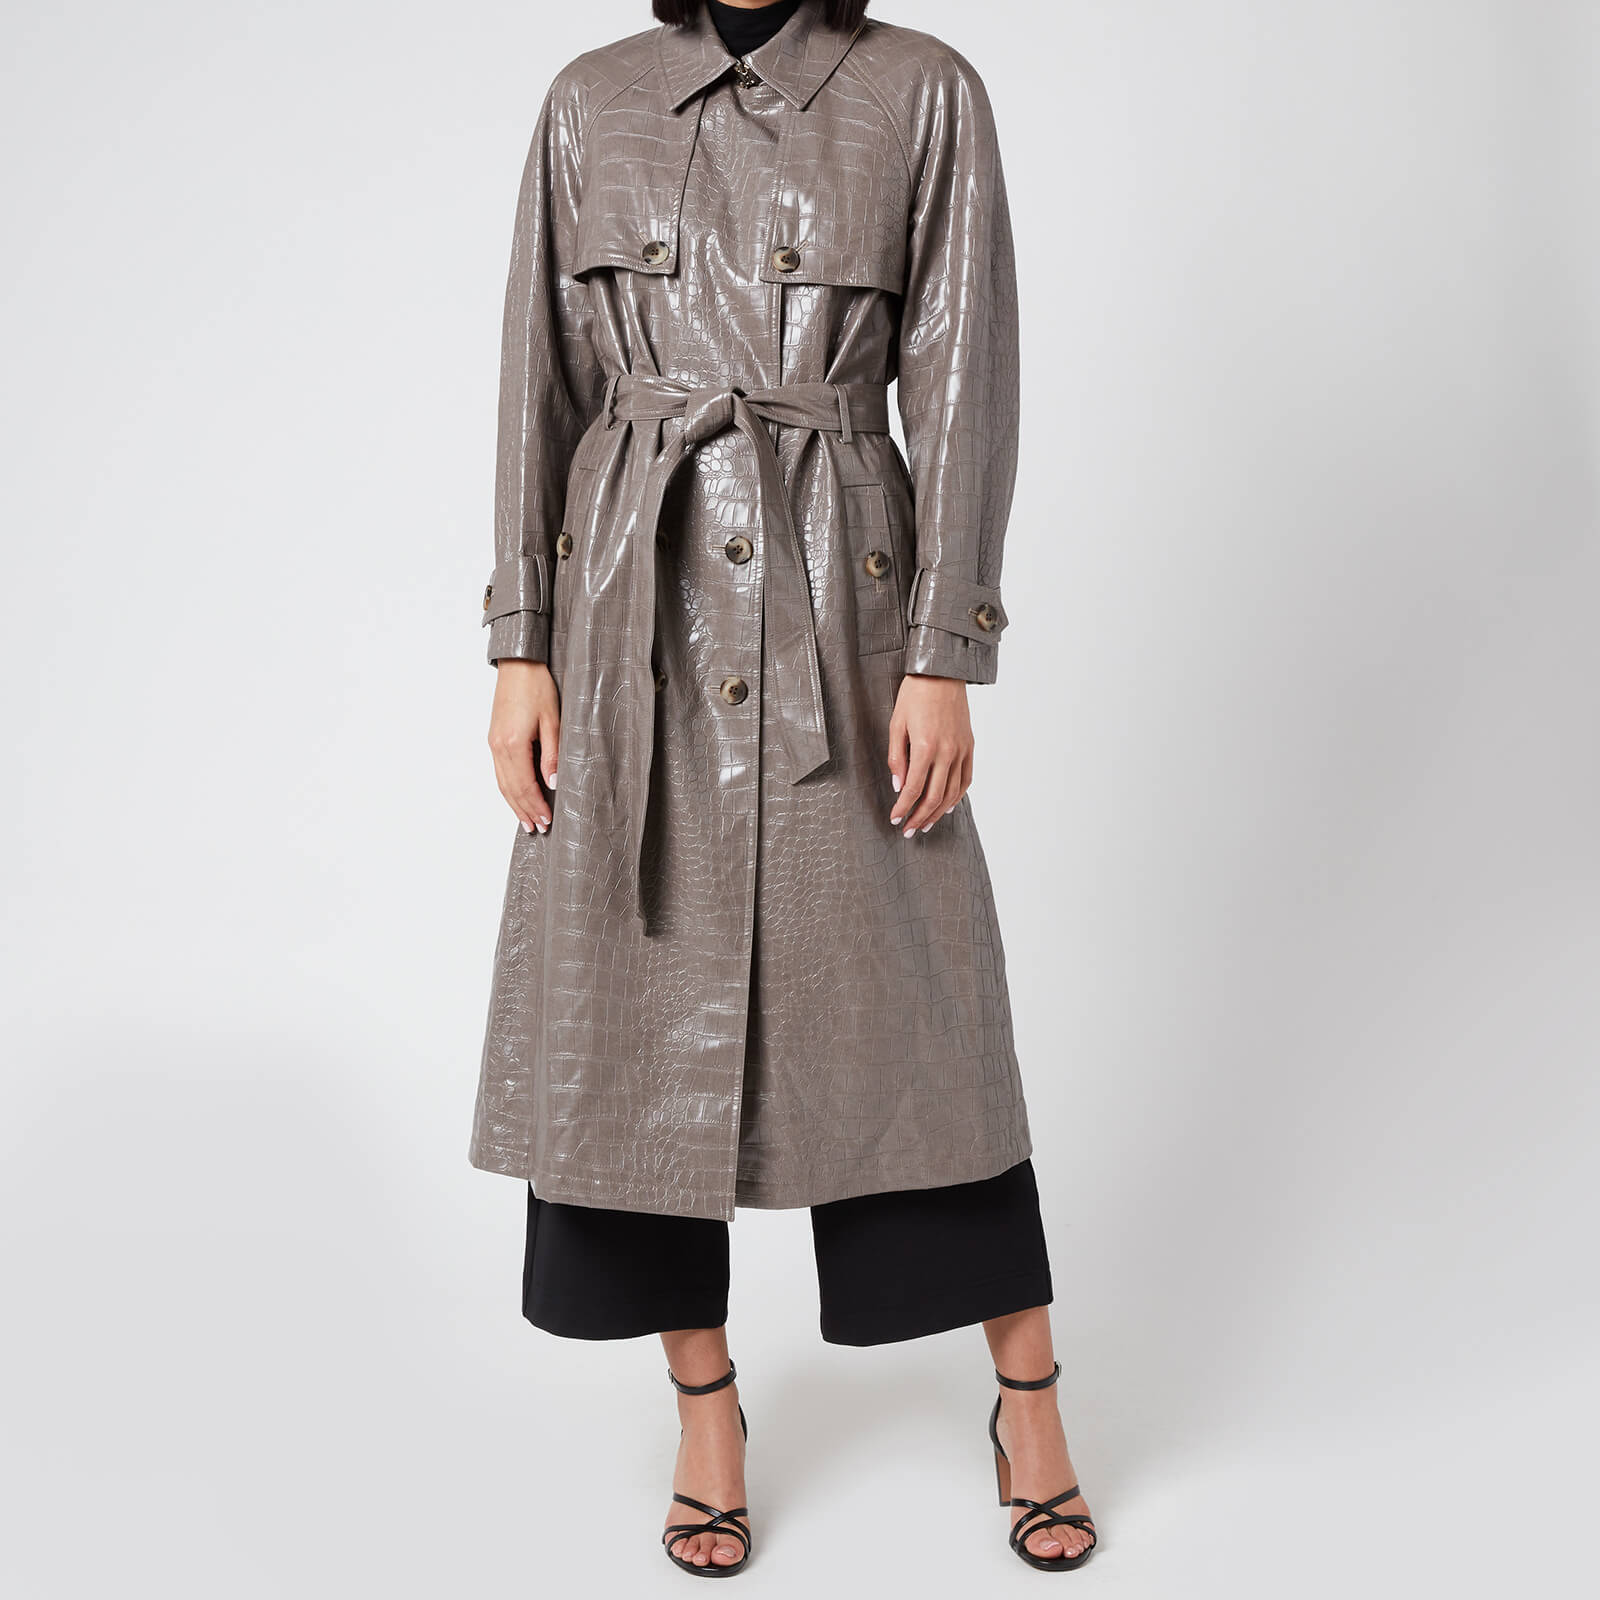 Whistles Women's Croc Belted Trench Coat - Grey - S